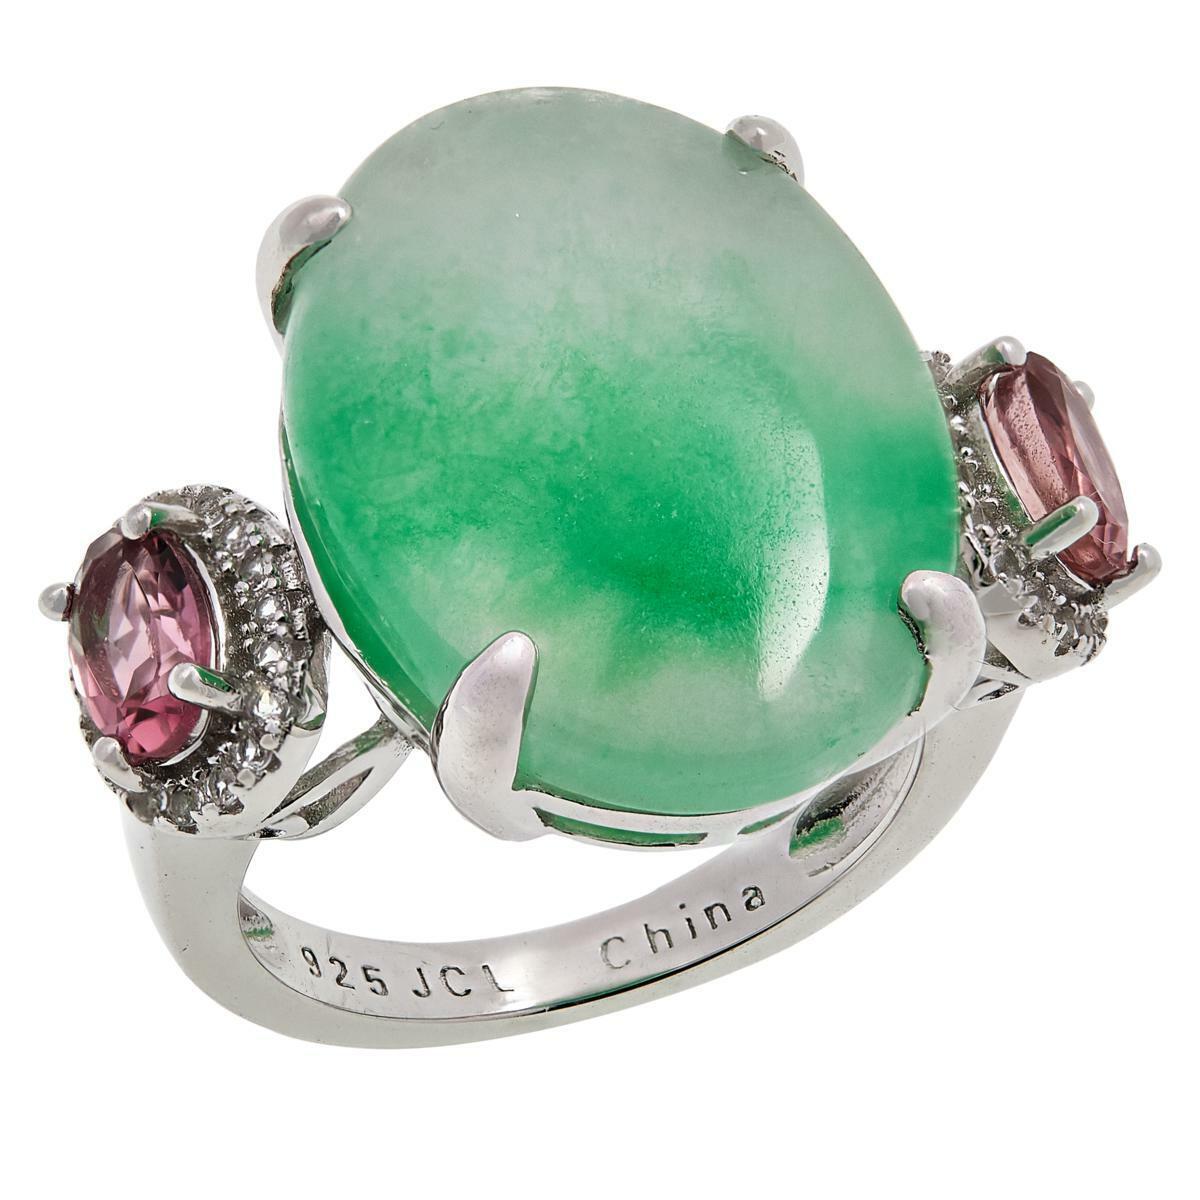 Colleen Lopez Jade, Pink Tourmaline and White Topaz Ring, Size 9